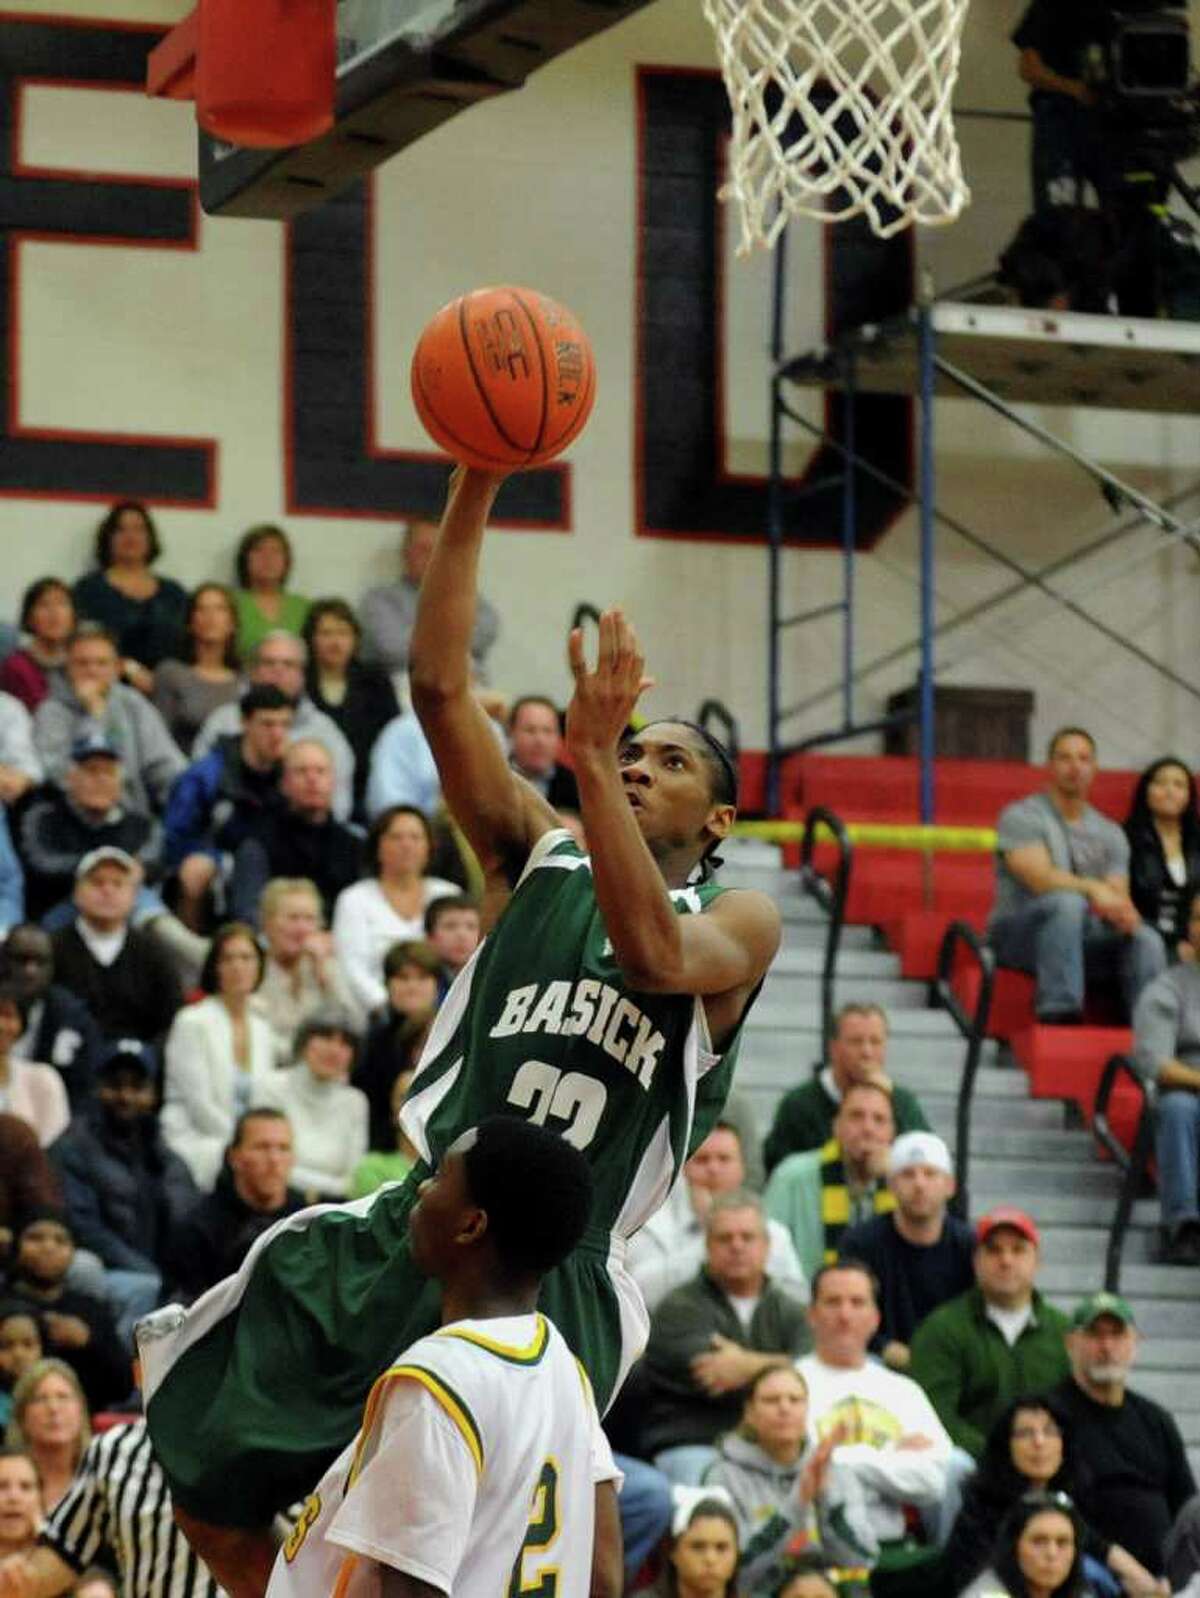 Bassick's Pashien Young lays up for two points, during FCIAC Boys' Basketball Championship action against Trinity Catholic in Fairfield, Conn. on Thursday March 1, 2012.